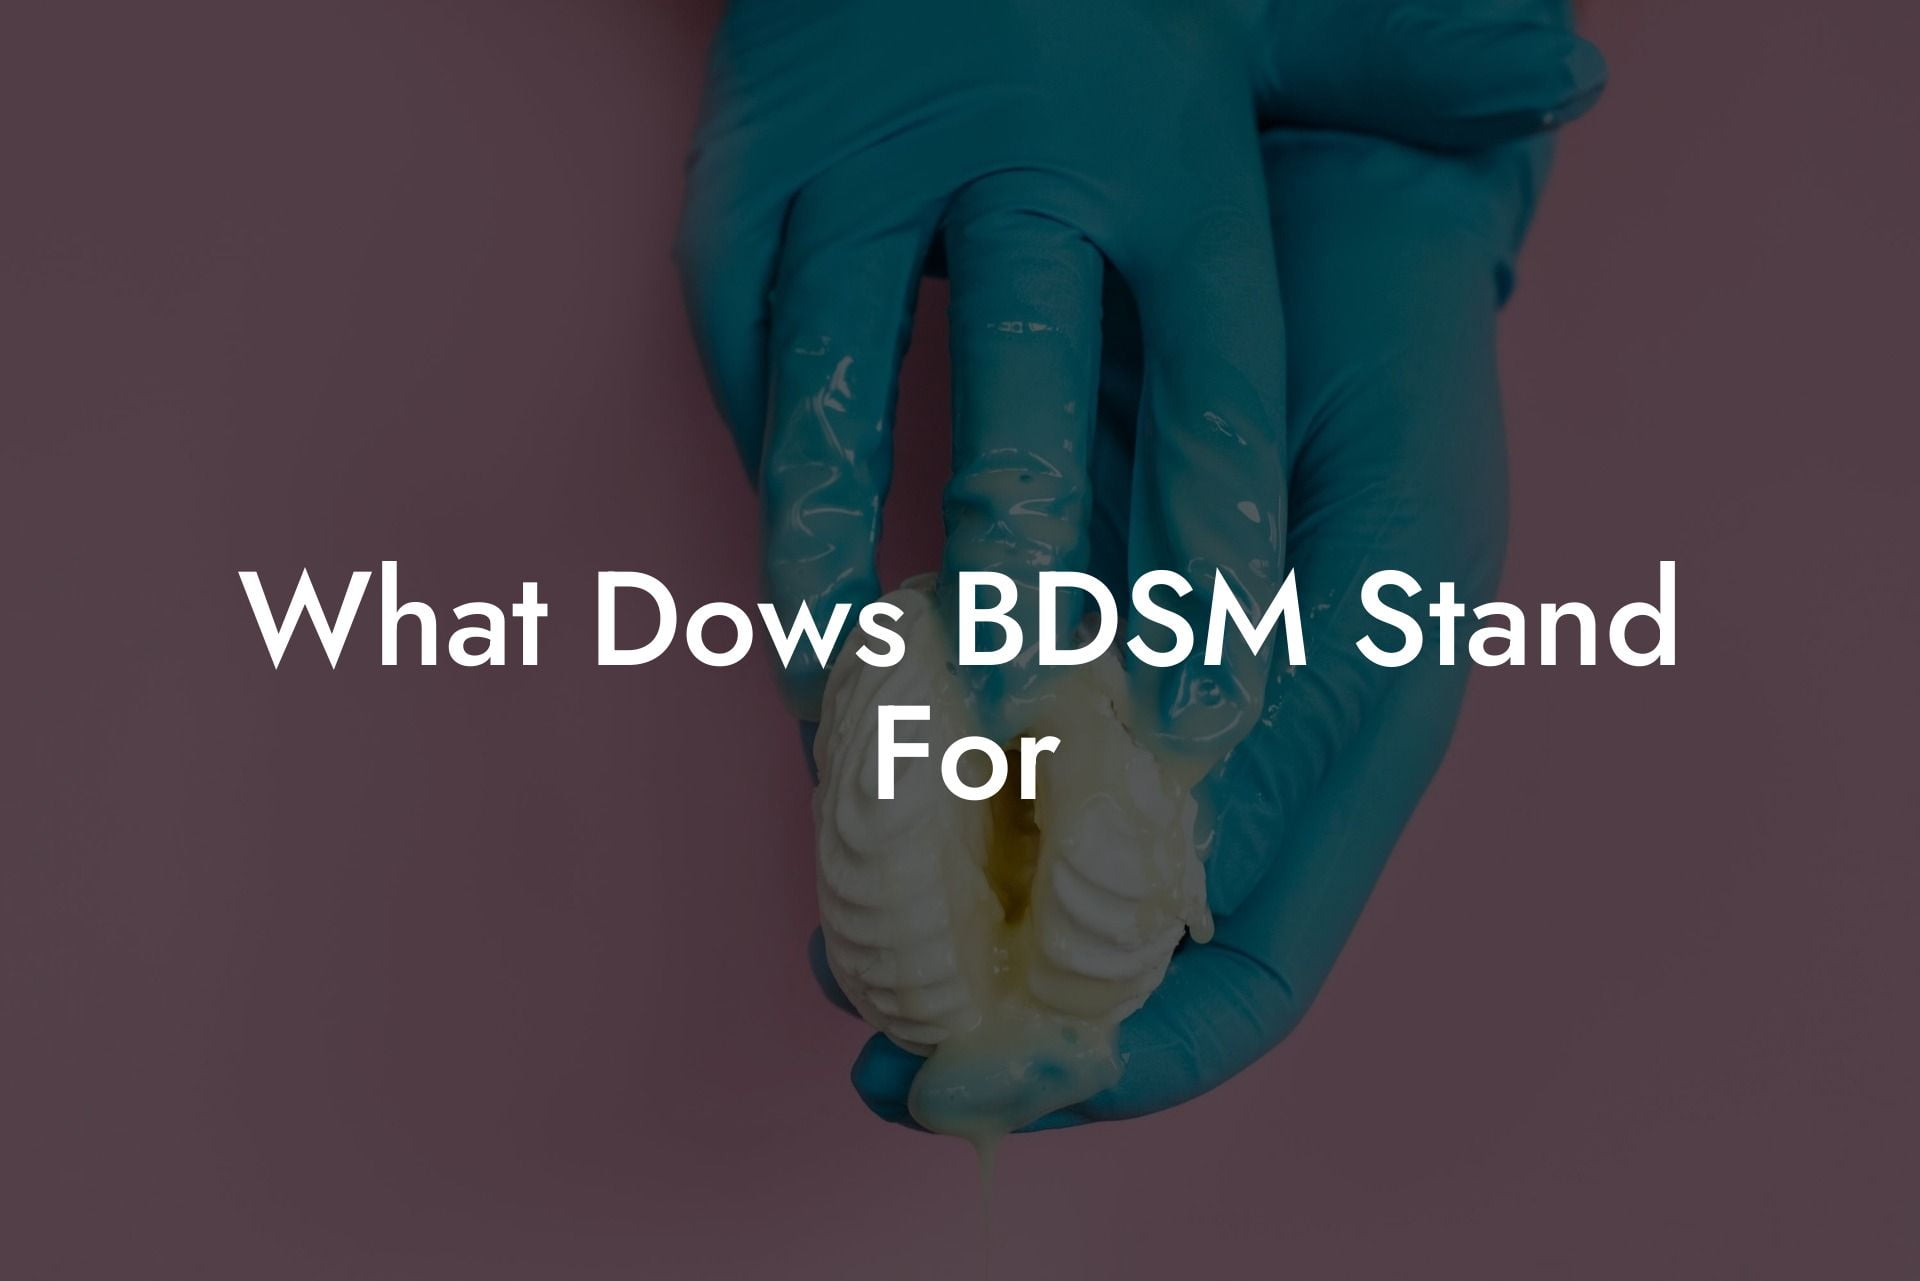 What Dows BDSM Stand For